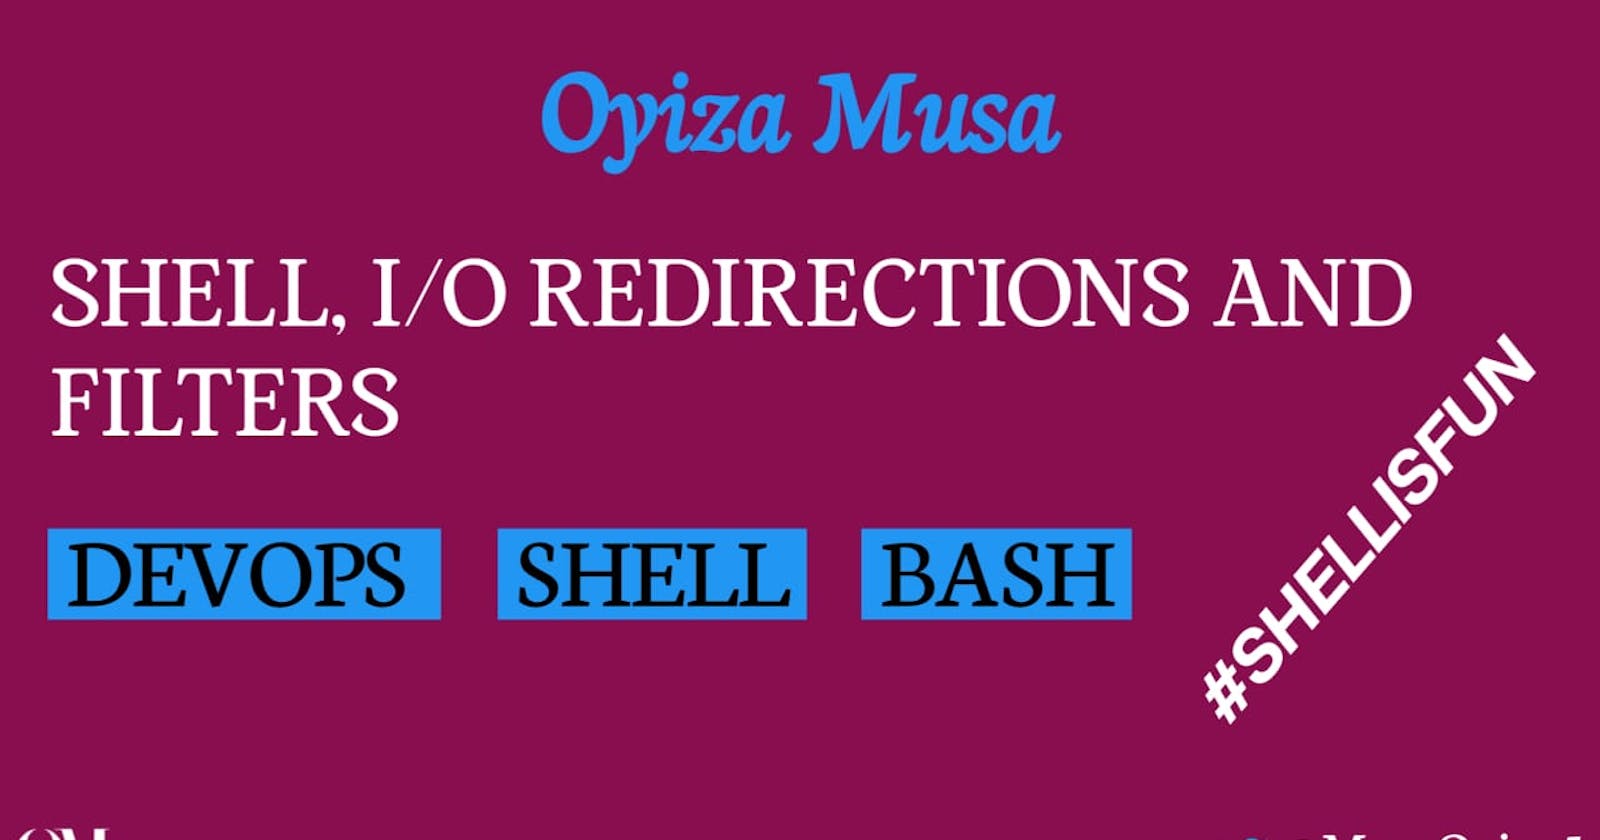 Shell, I/O redirections, and filters